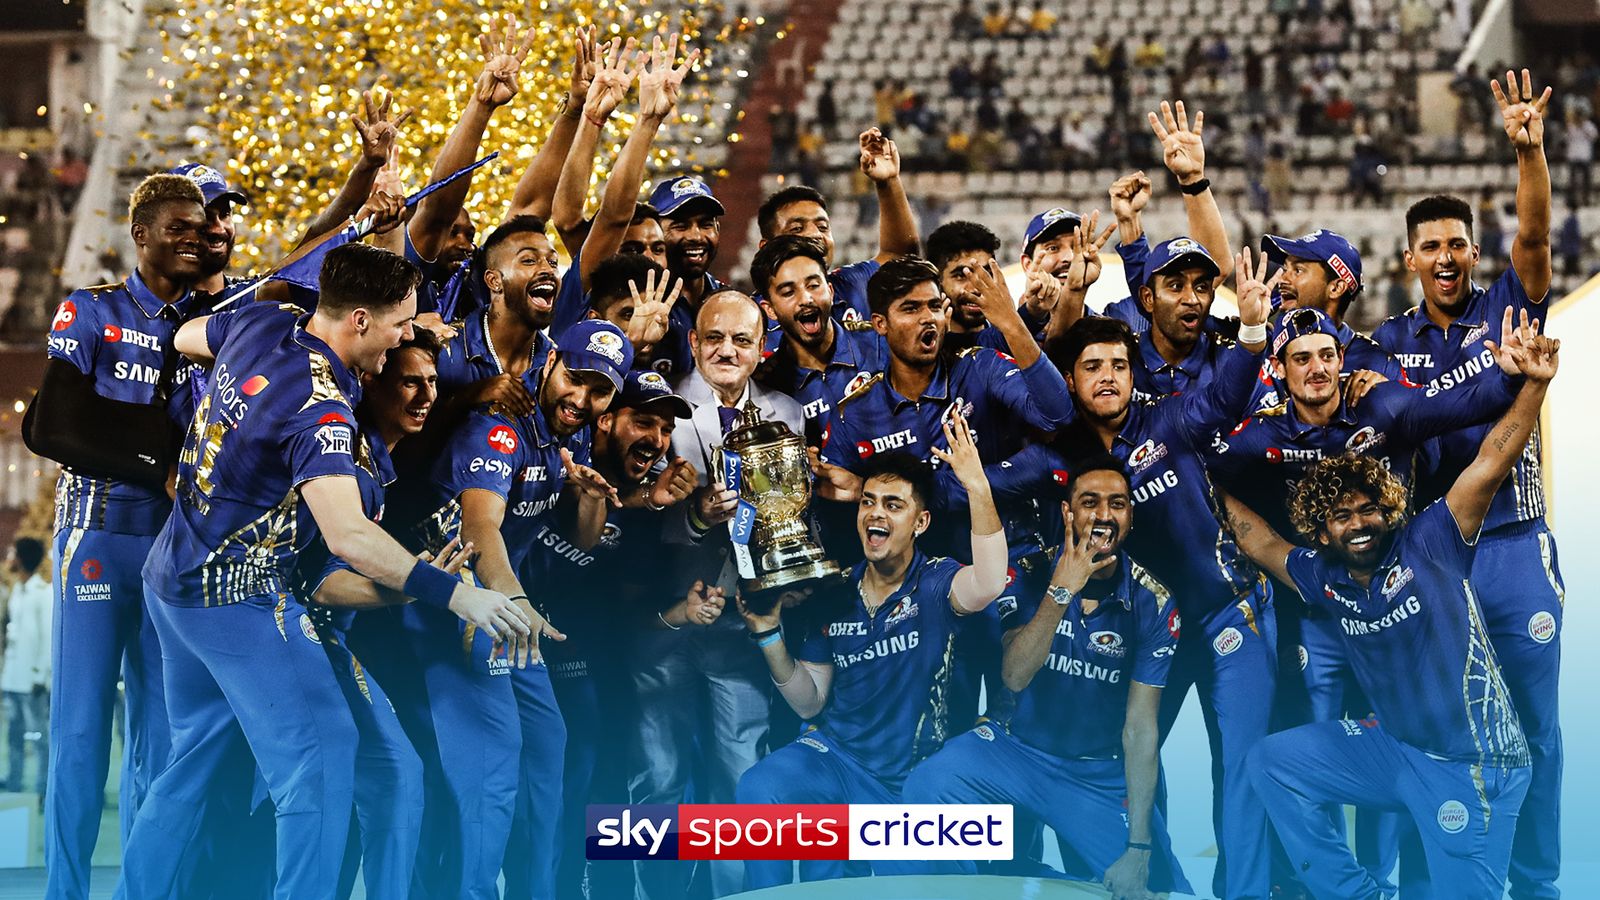 IPL returns to Sky Sports in 2020 as part of a threeyear contract